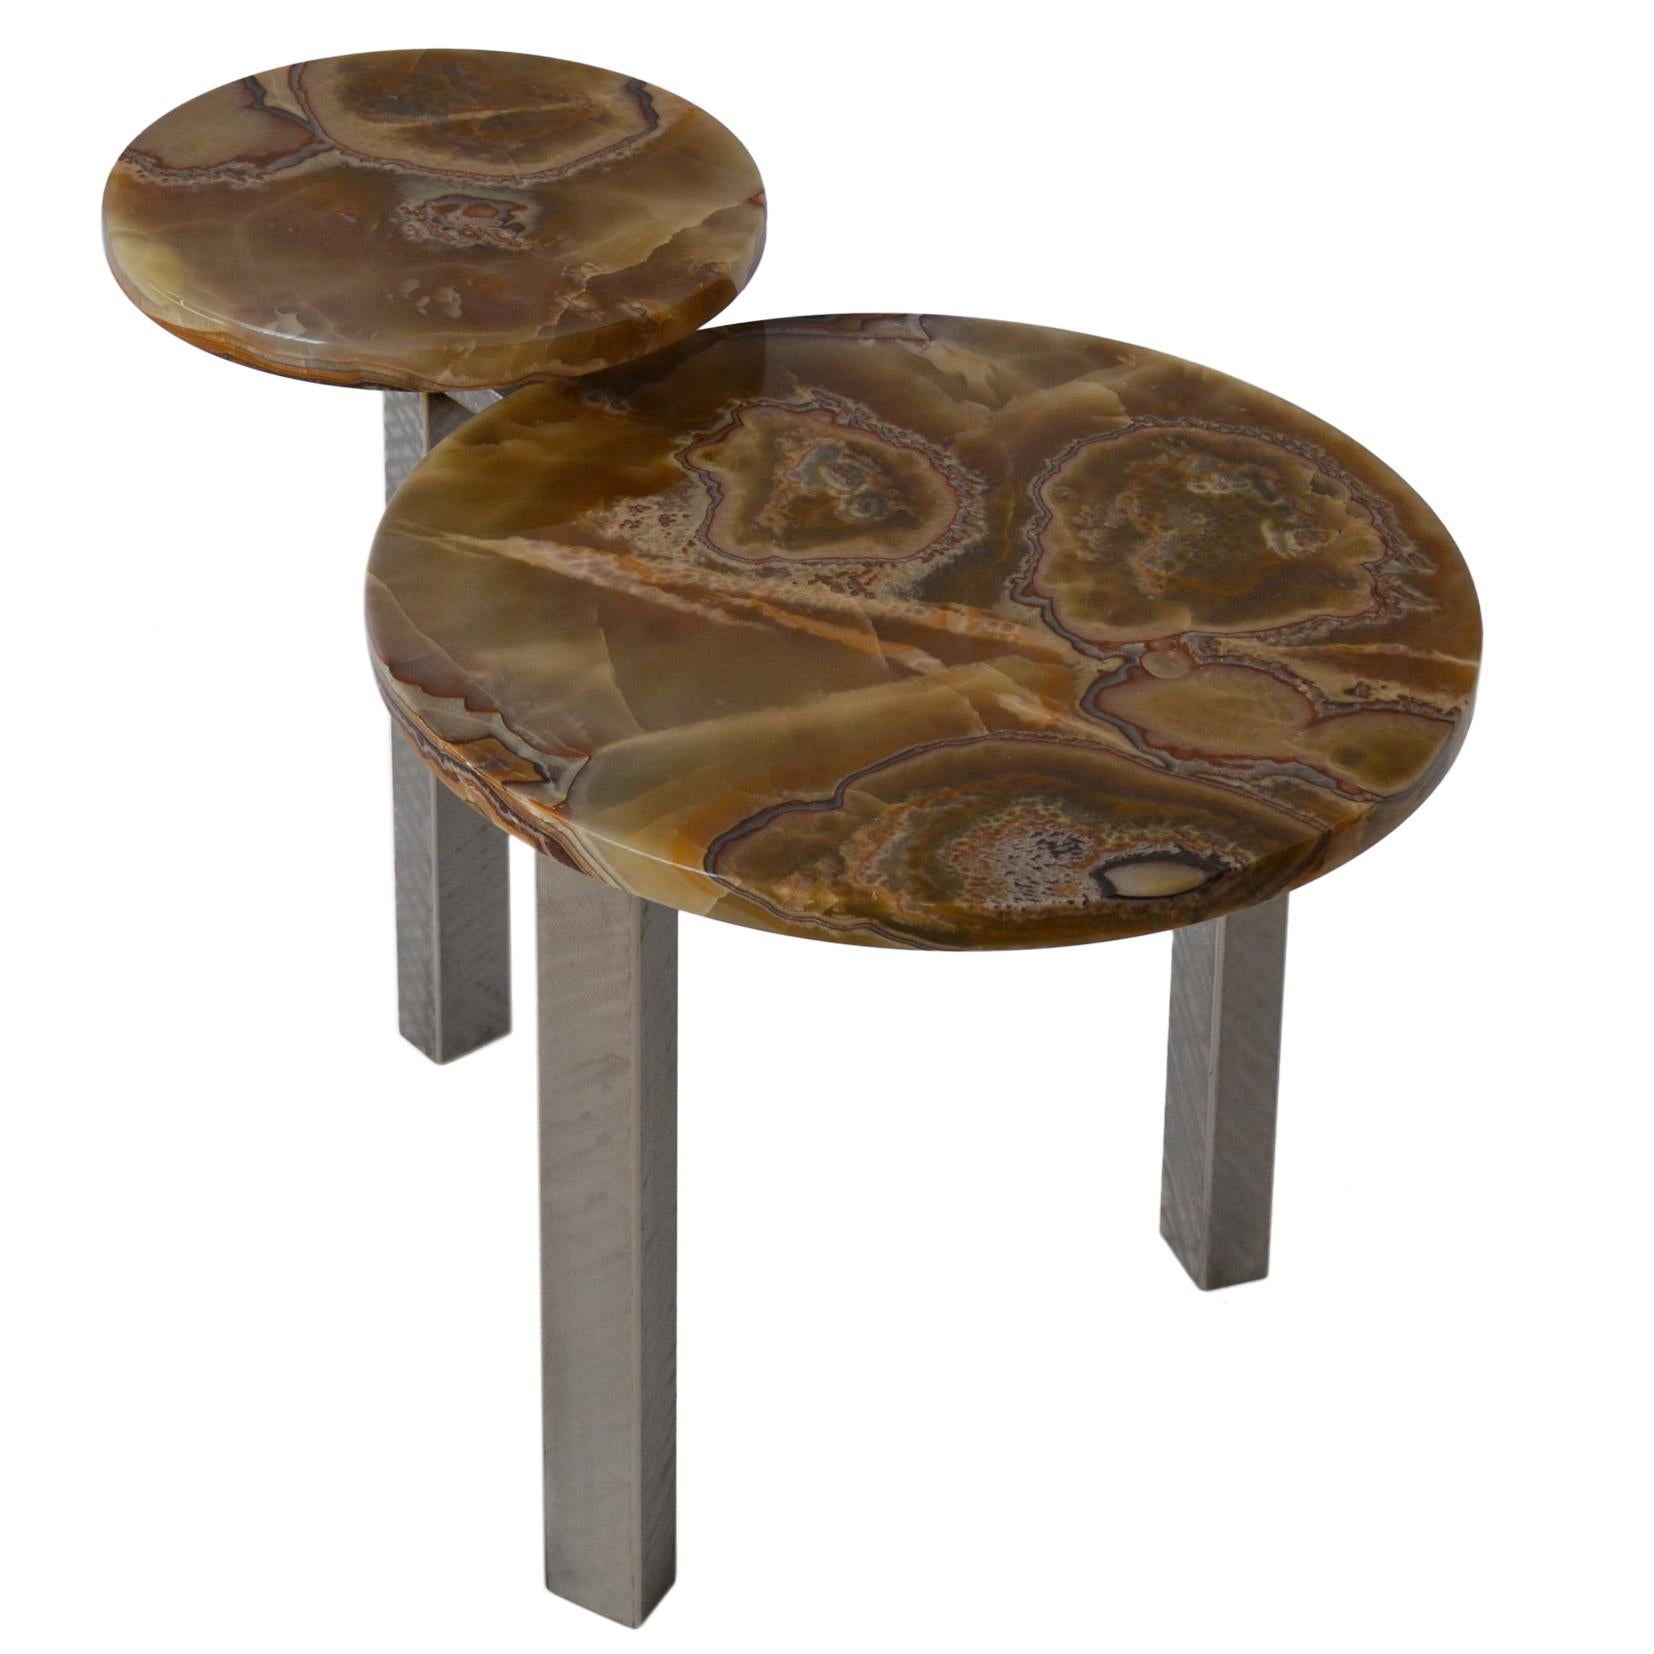 This table is handcrafted using 2 kind of materials as grinded-finished stainless steel for the three legs and elegant Onyx on the two tops. The table has a functional use, based on two levels of tops and it is an elegant choise for a modern or